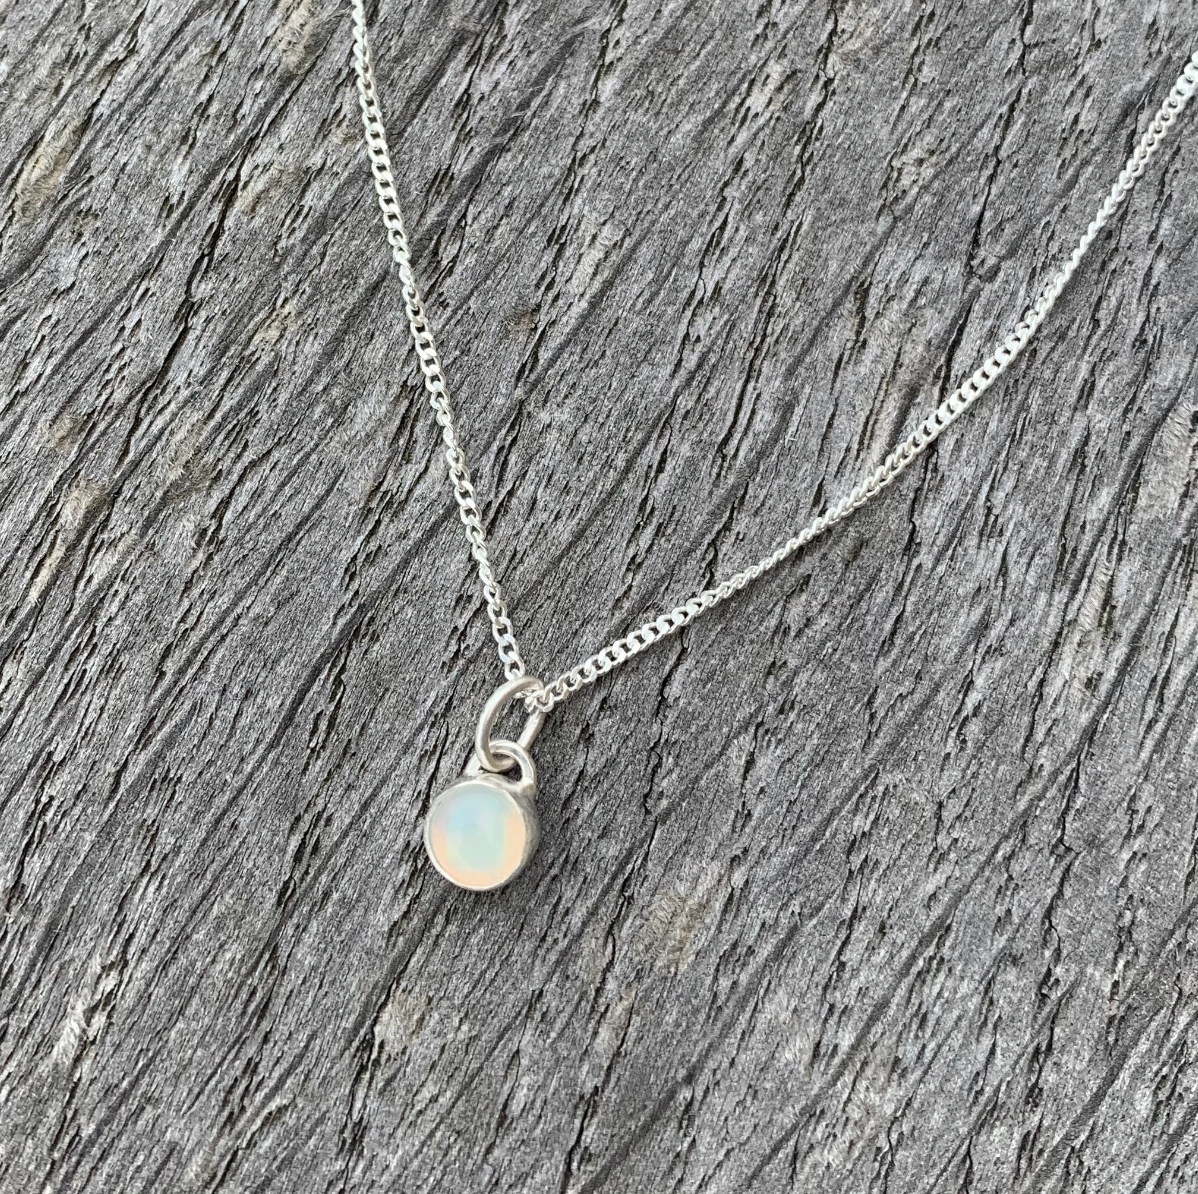 A rainbow opal set charm paired with a sterling silver chain.